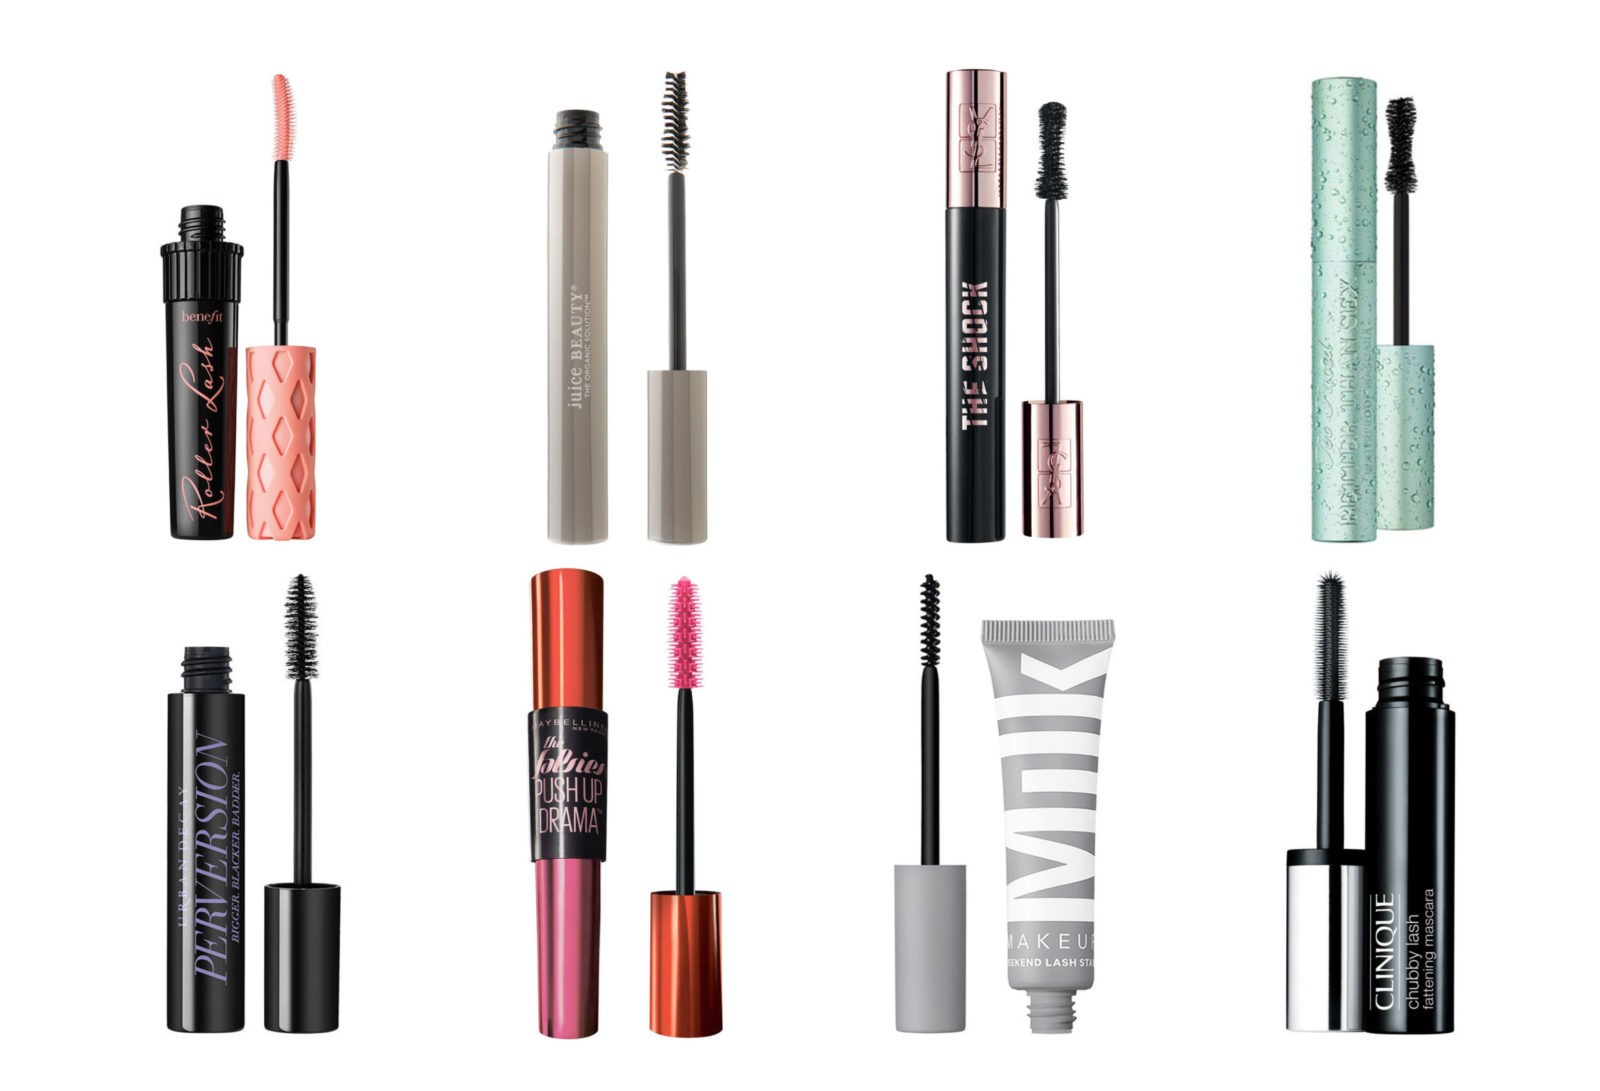 I obsess over finding the perfect mascara and wanted to share my picks for best mascaras of all time. Check out all 12 brands!